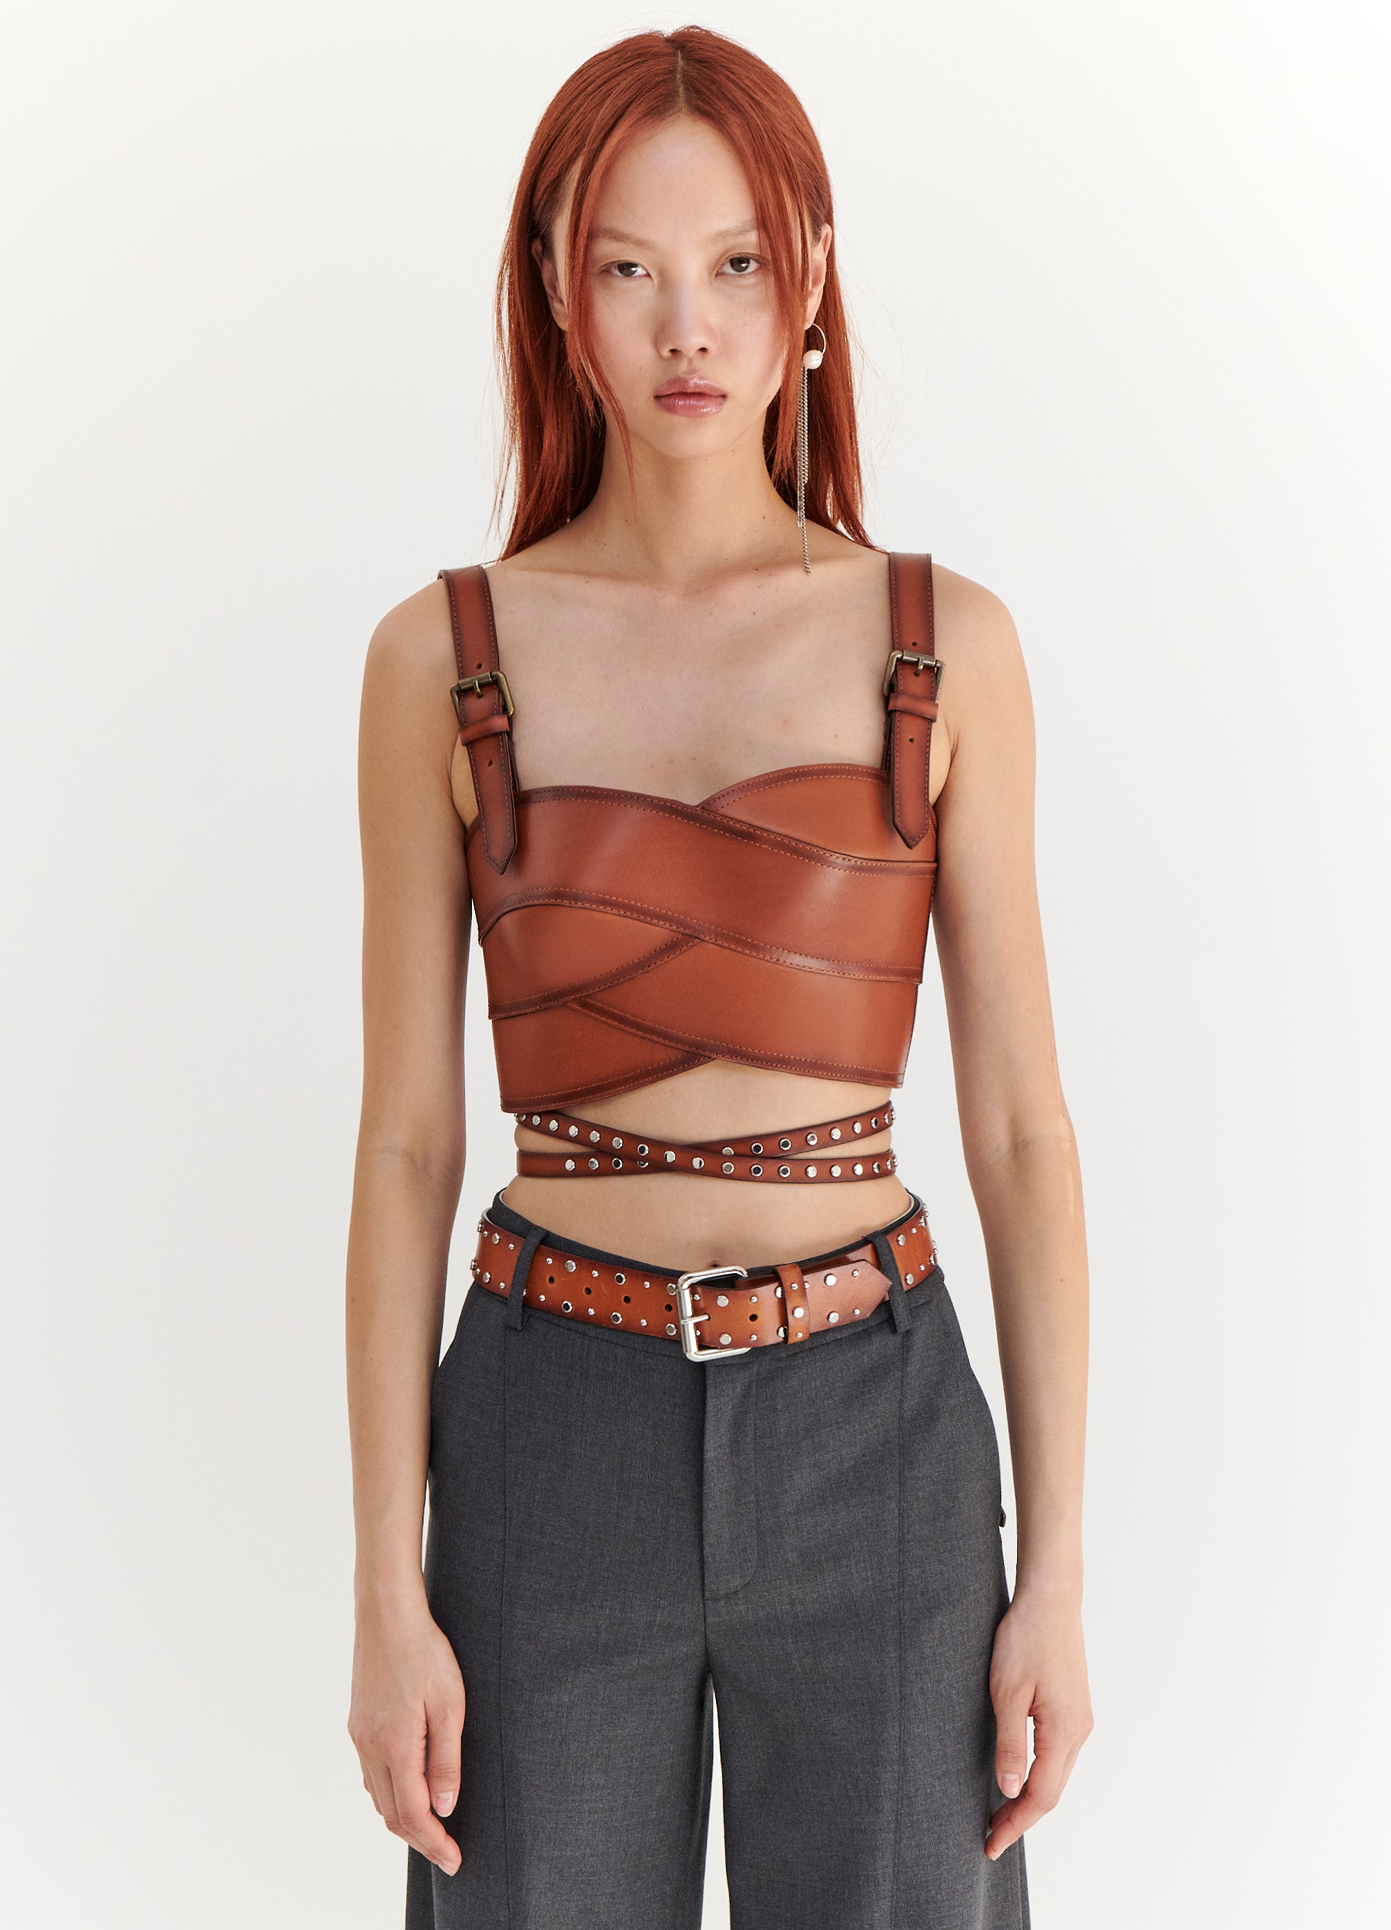 MONSE Leather Bustier in Brown on model front view